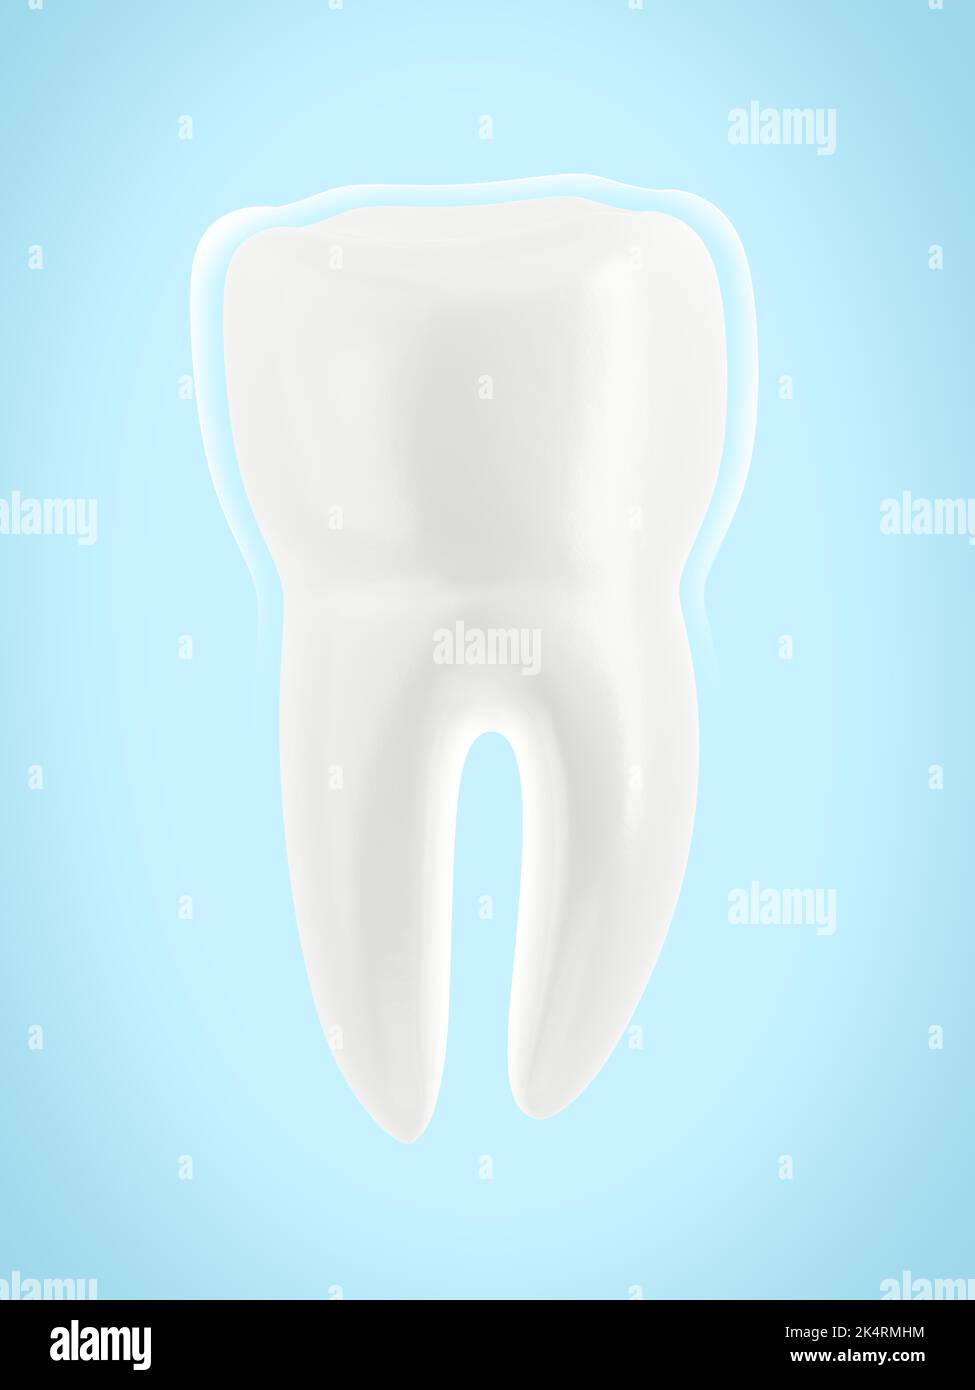 Tooth protection. Healthy teeth. Oral hygiene. Blue background. 3d illustration. Stock Photo